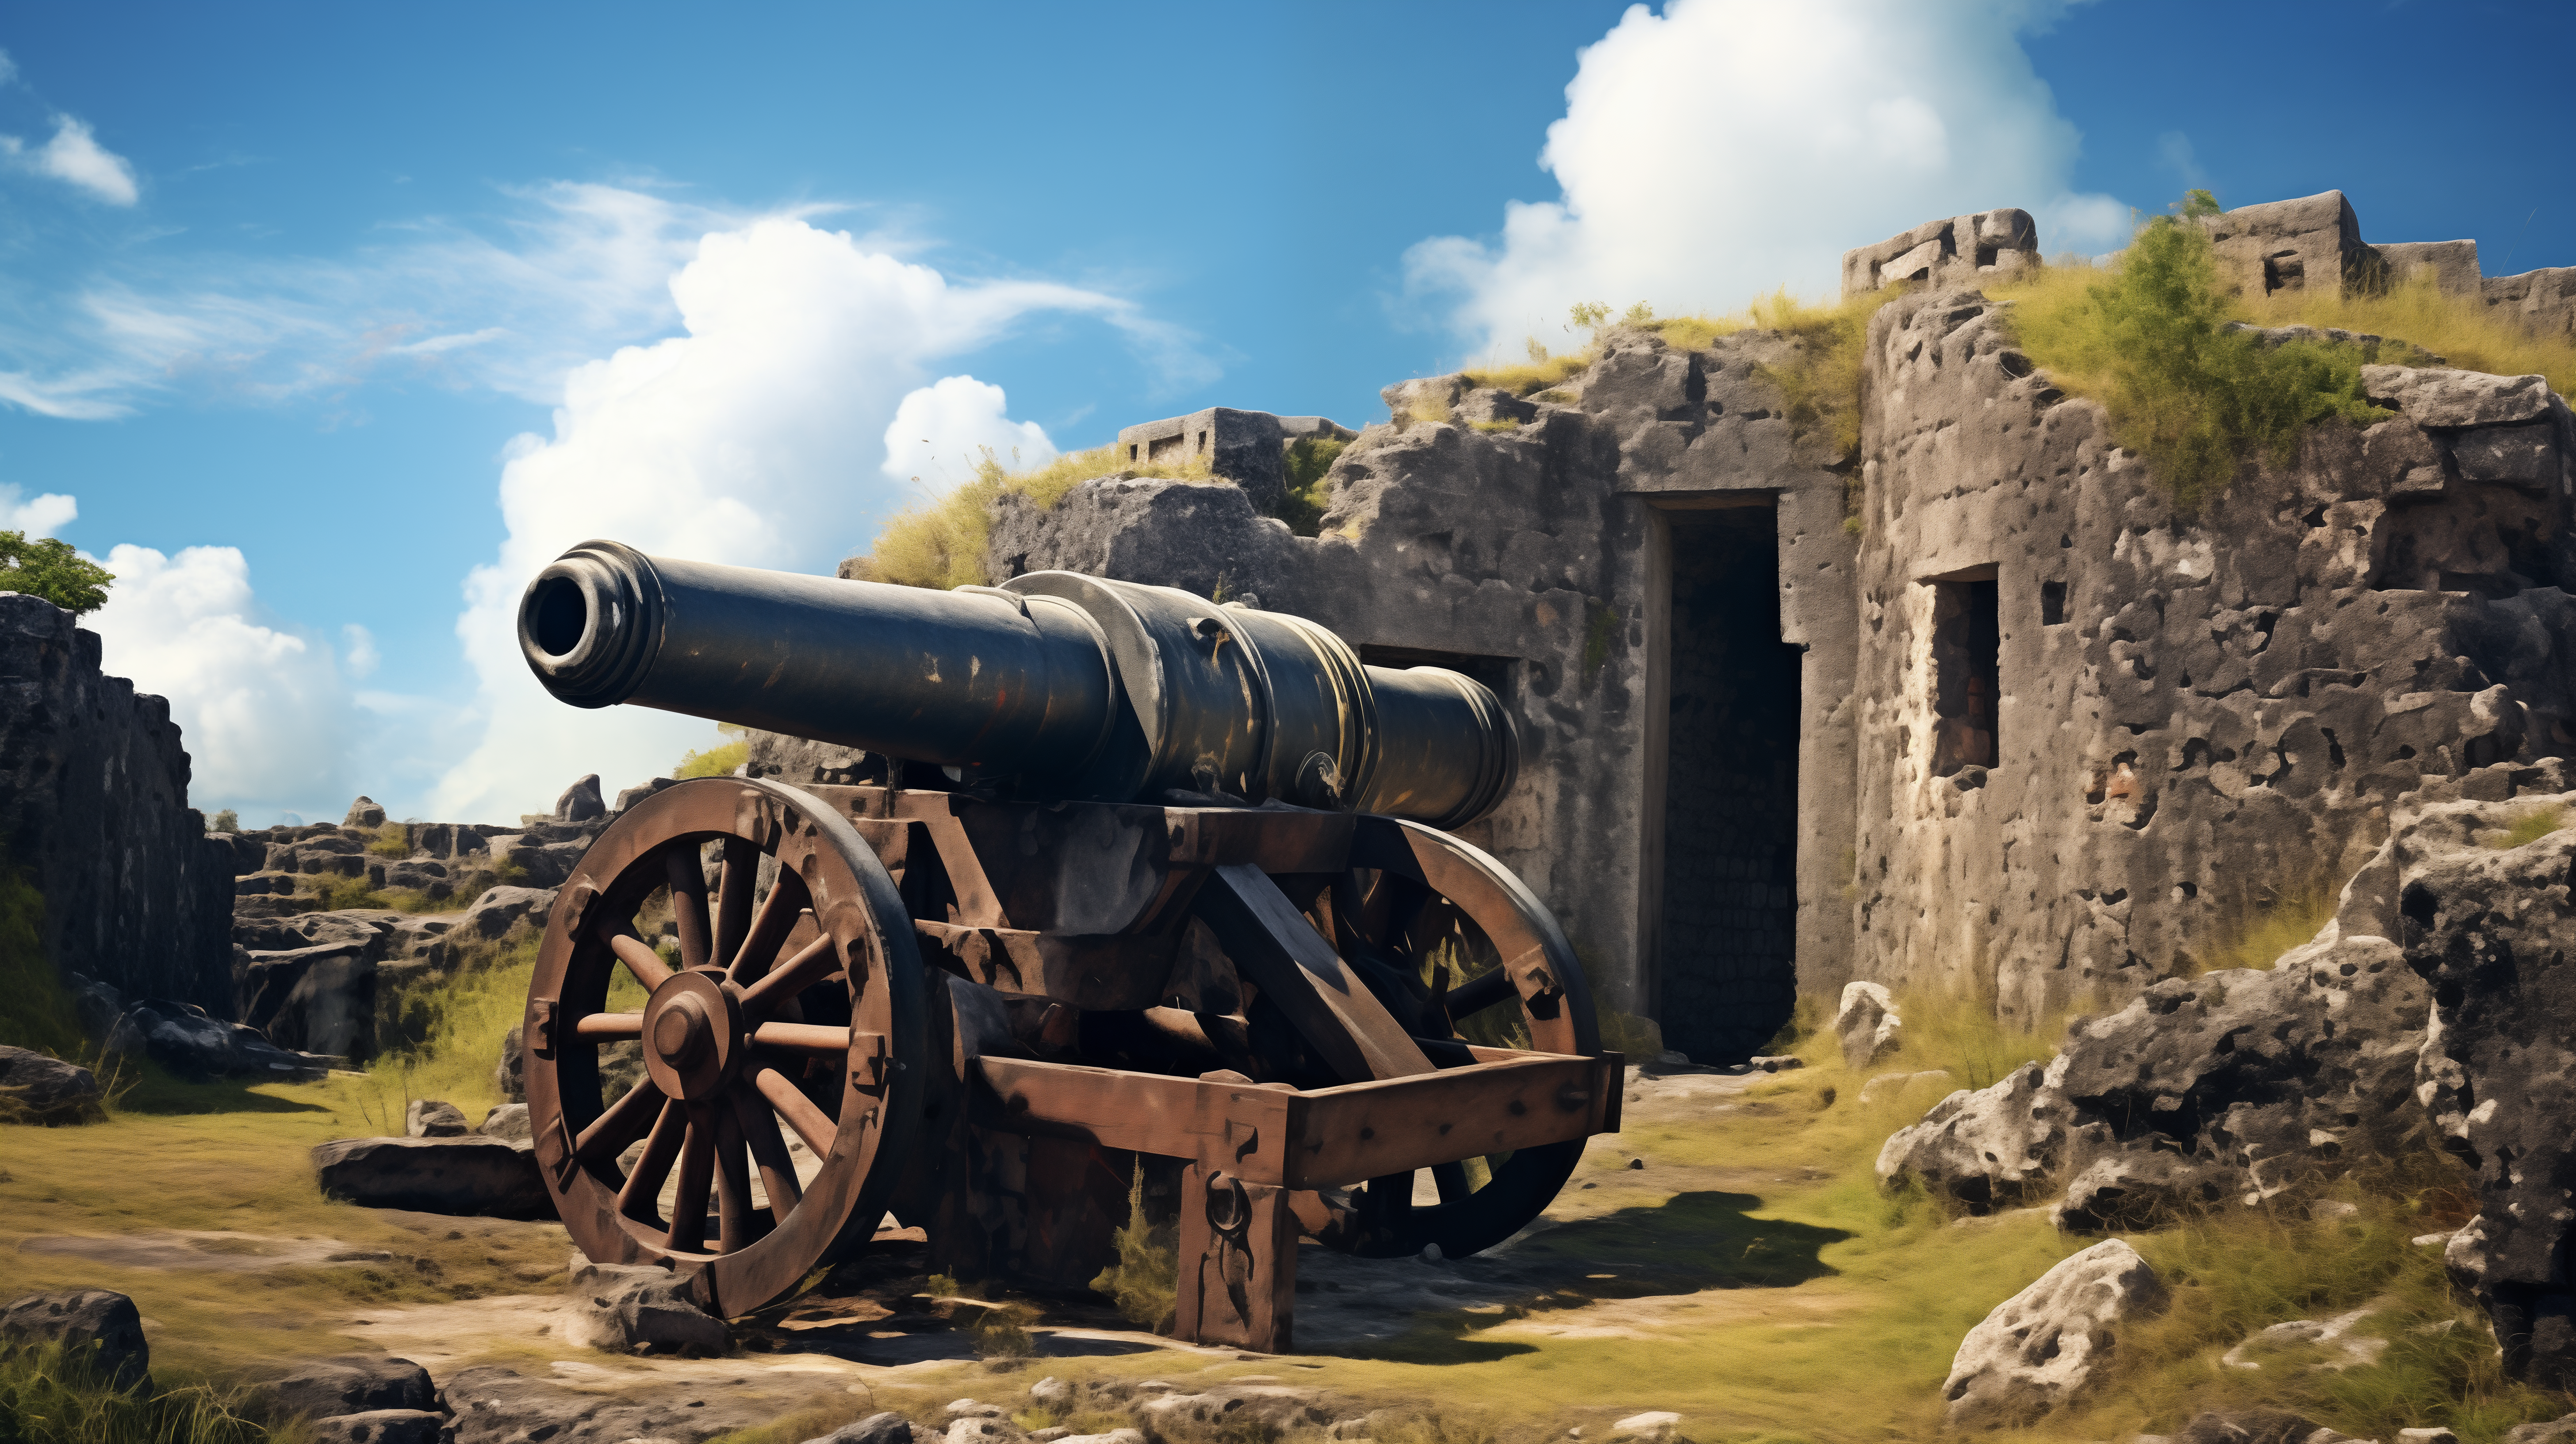 HD desktop wallpaper featuring an ancient cannon on wooden wheels in front of historic stone fortress ruins under a clear blue sky.